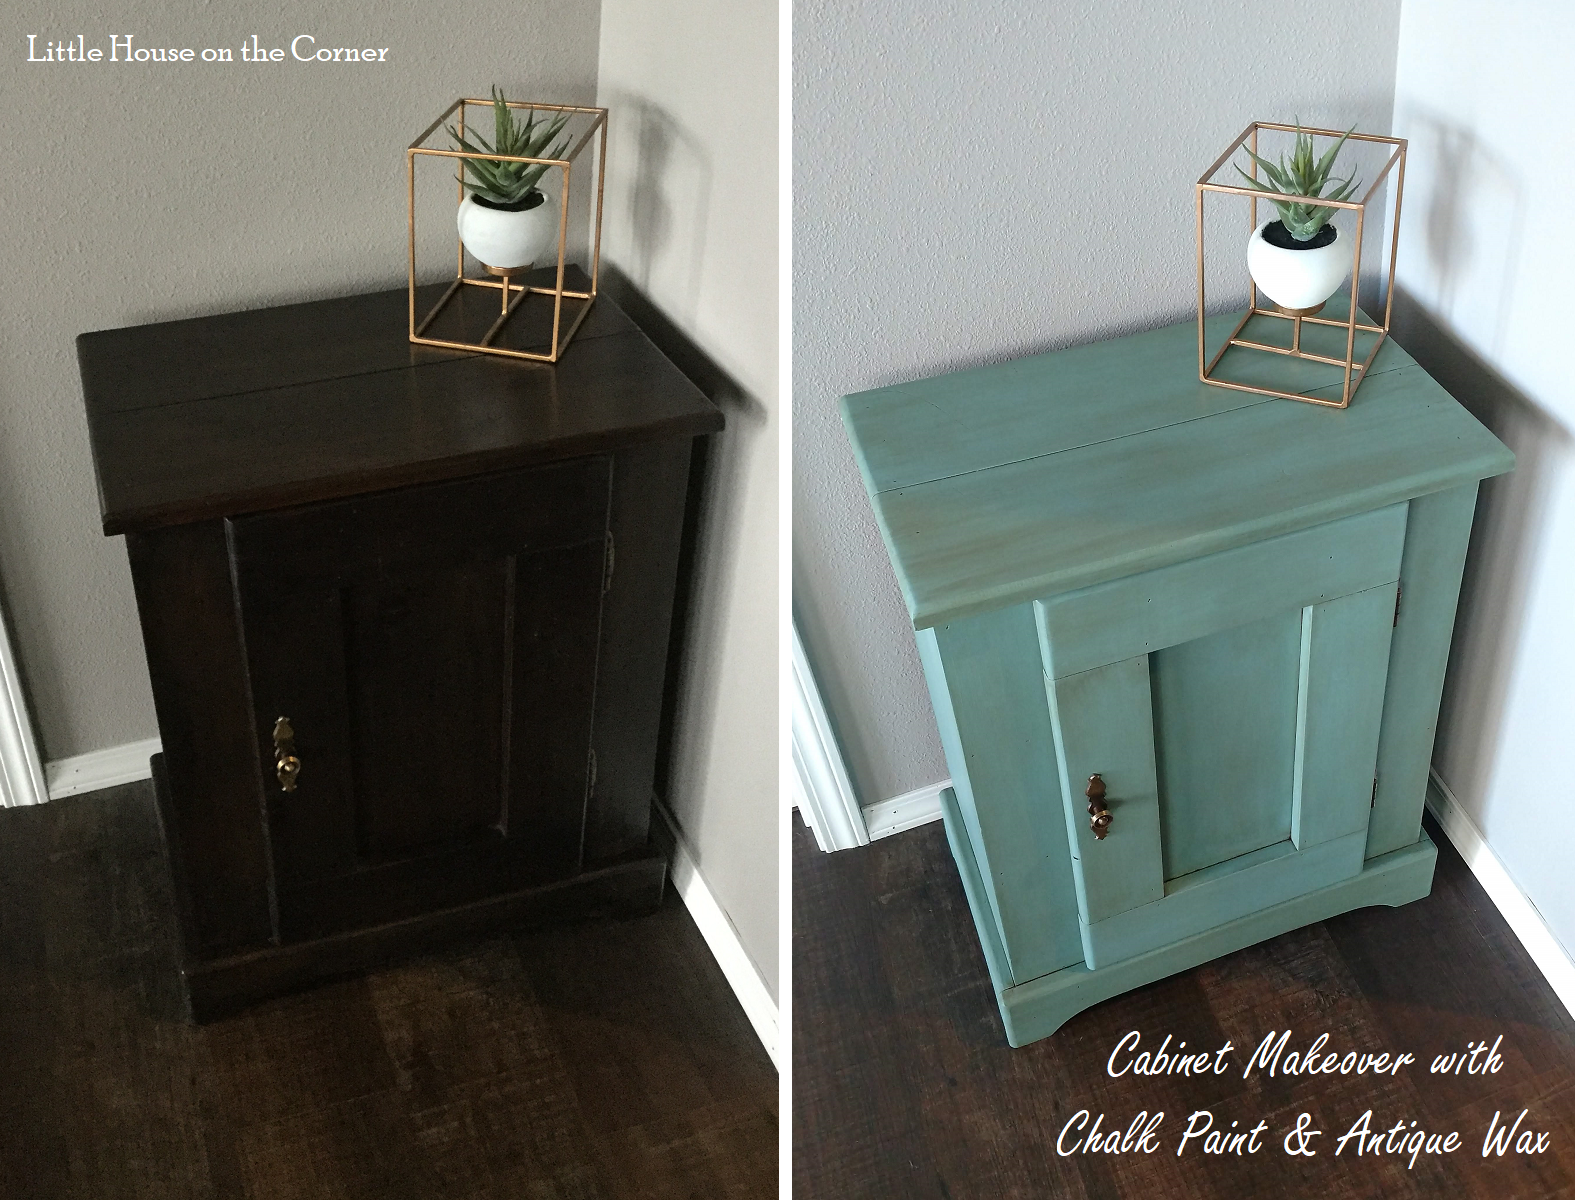 Little House on the Corner: Cabinet Makeover: Chalk Paint with Antique Wax